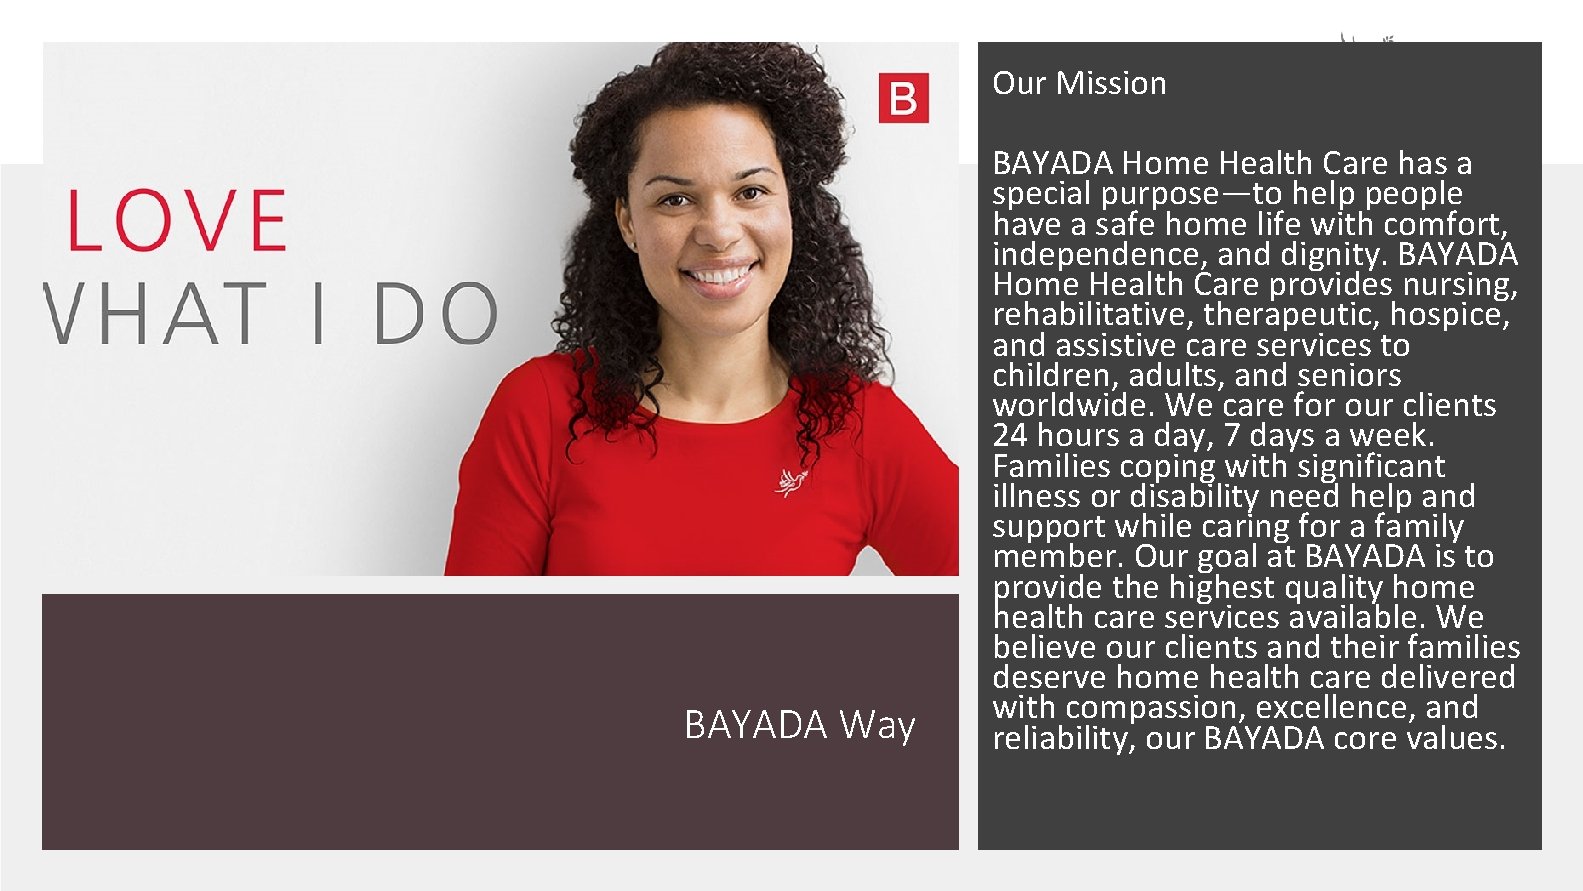 Our Mission BAYADA Way BAYADA Home Health Care has a special purpose—to help people